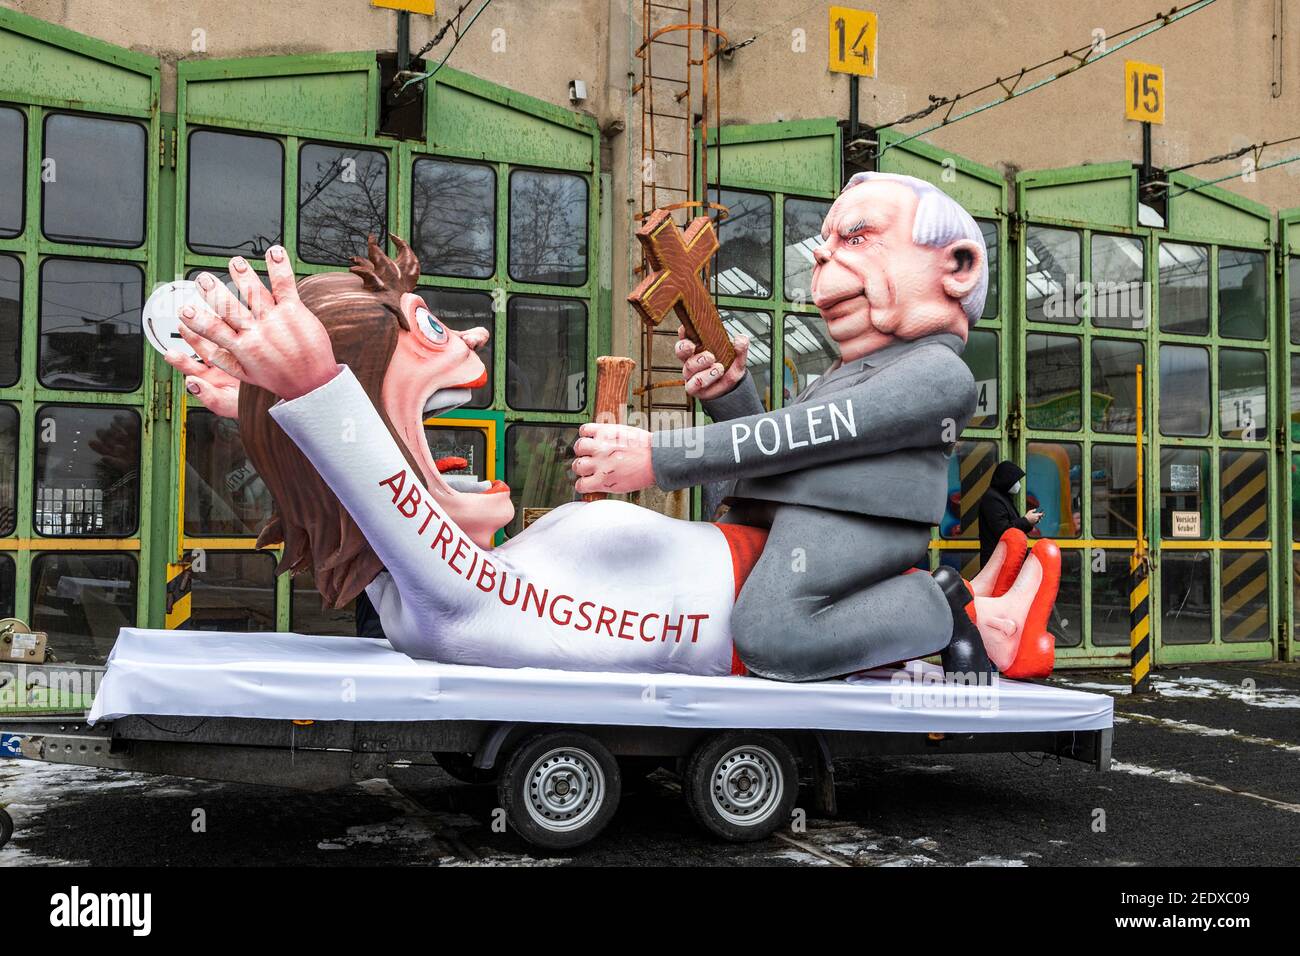 Dusseldorf, Germany. 15 February 2021. Float criticising the strict abortion law in Poland. Carnival floats created by German artist Jacques Tilly were presented and later exhibited throughout Dusseldorf as the main carnival parade was cancelled due to the coronavirus pandemic. Credit: Bettina Strenske/Alamy Live News Stock Photo